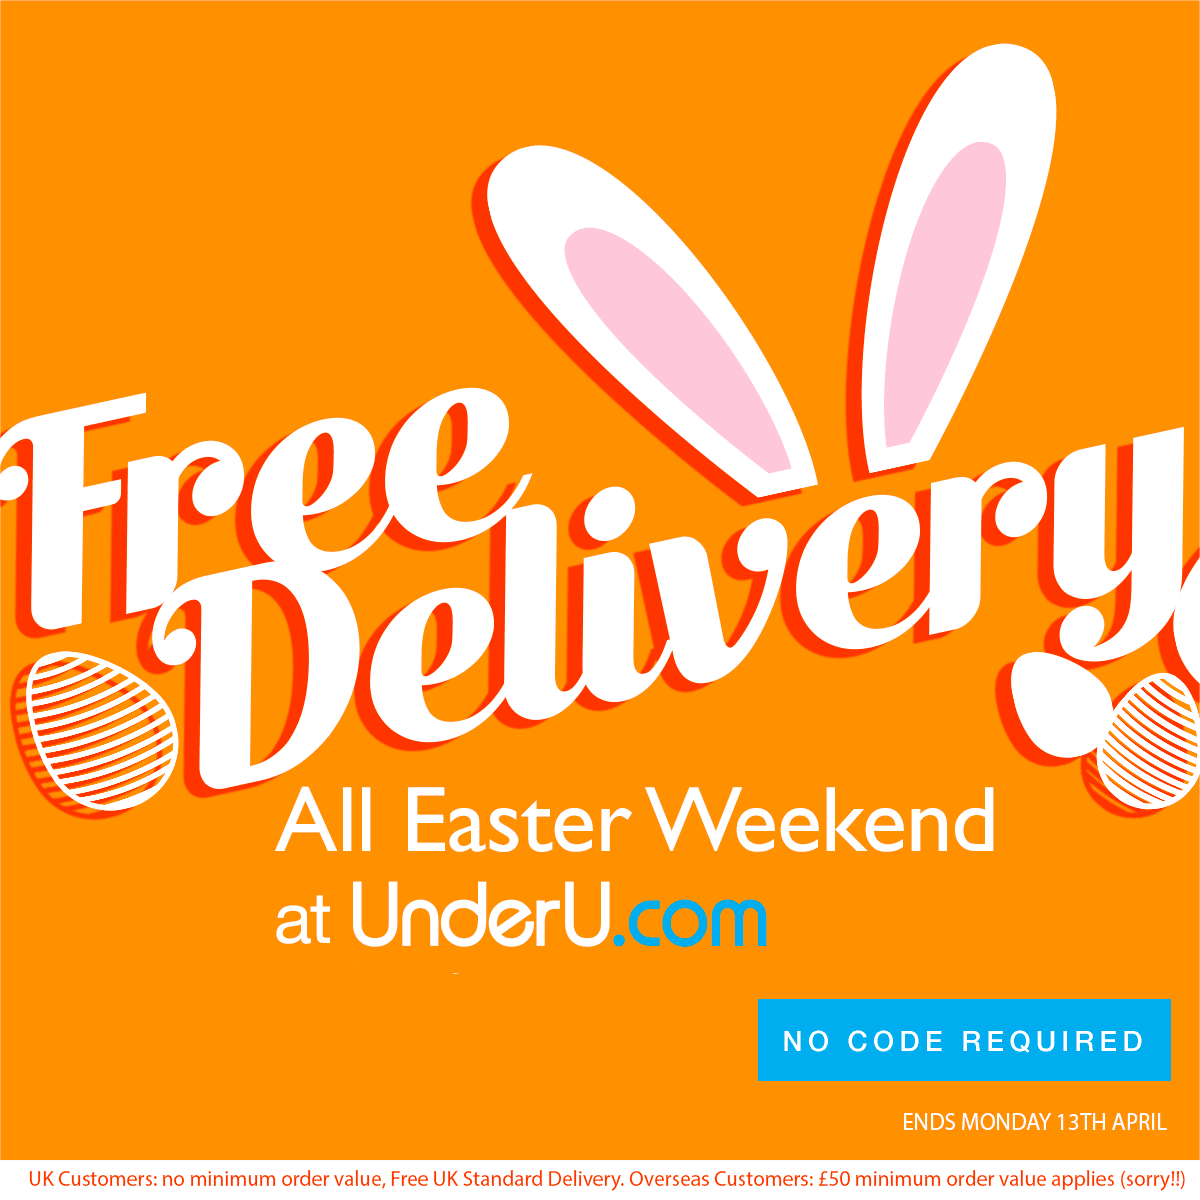 FREE DELIVERY All Easter Weekend